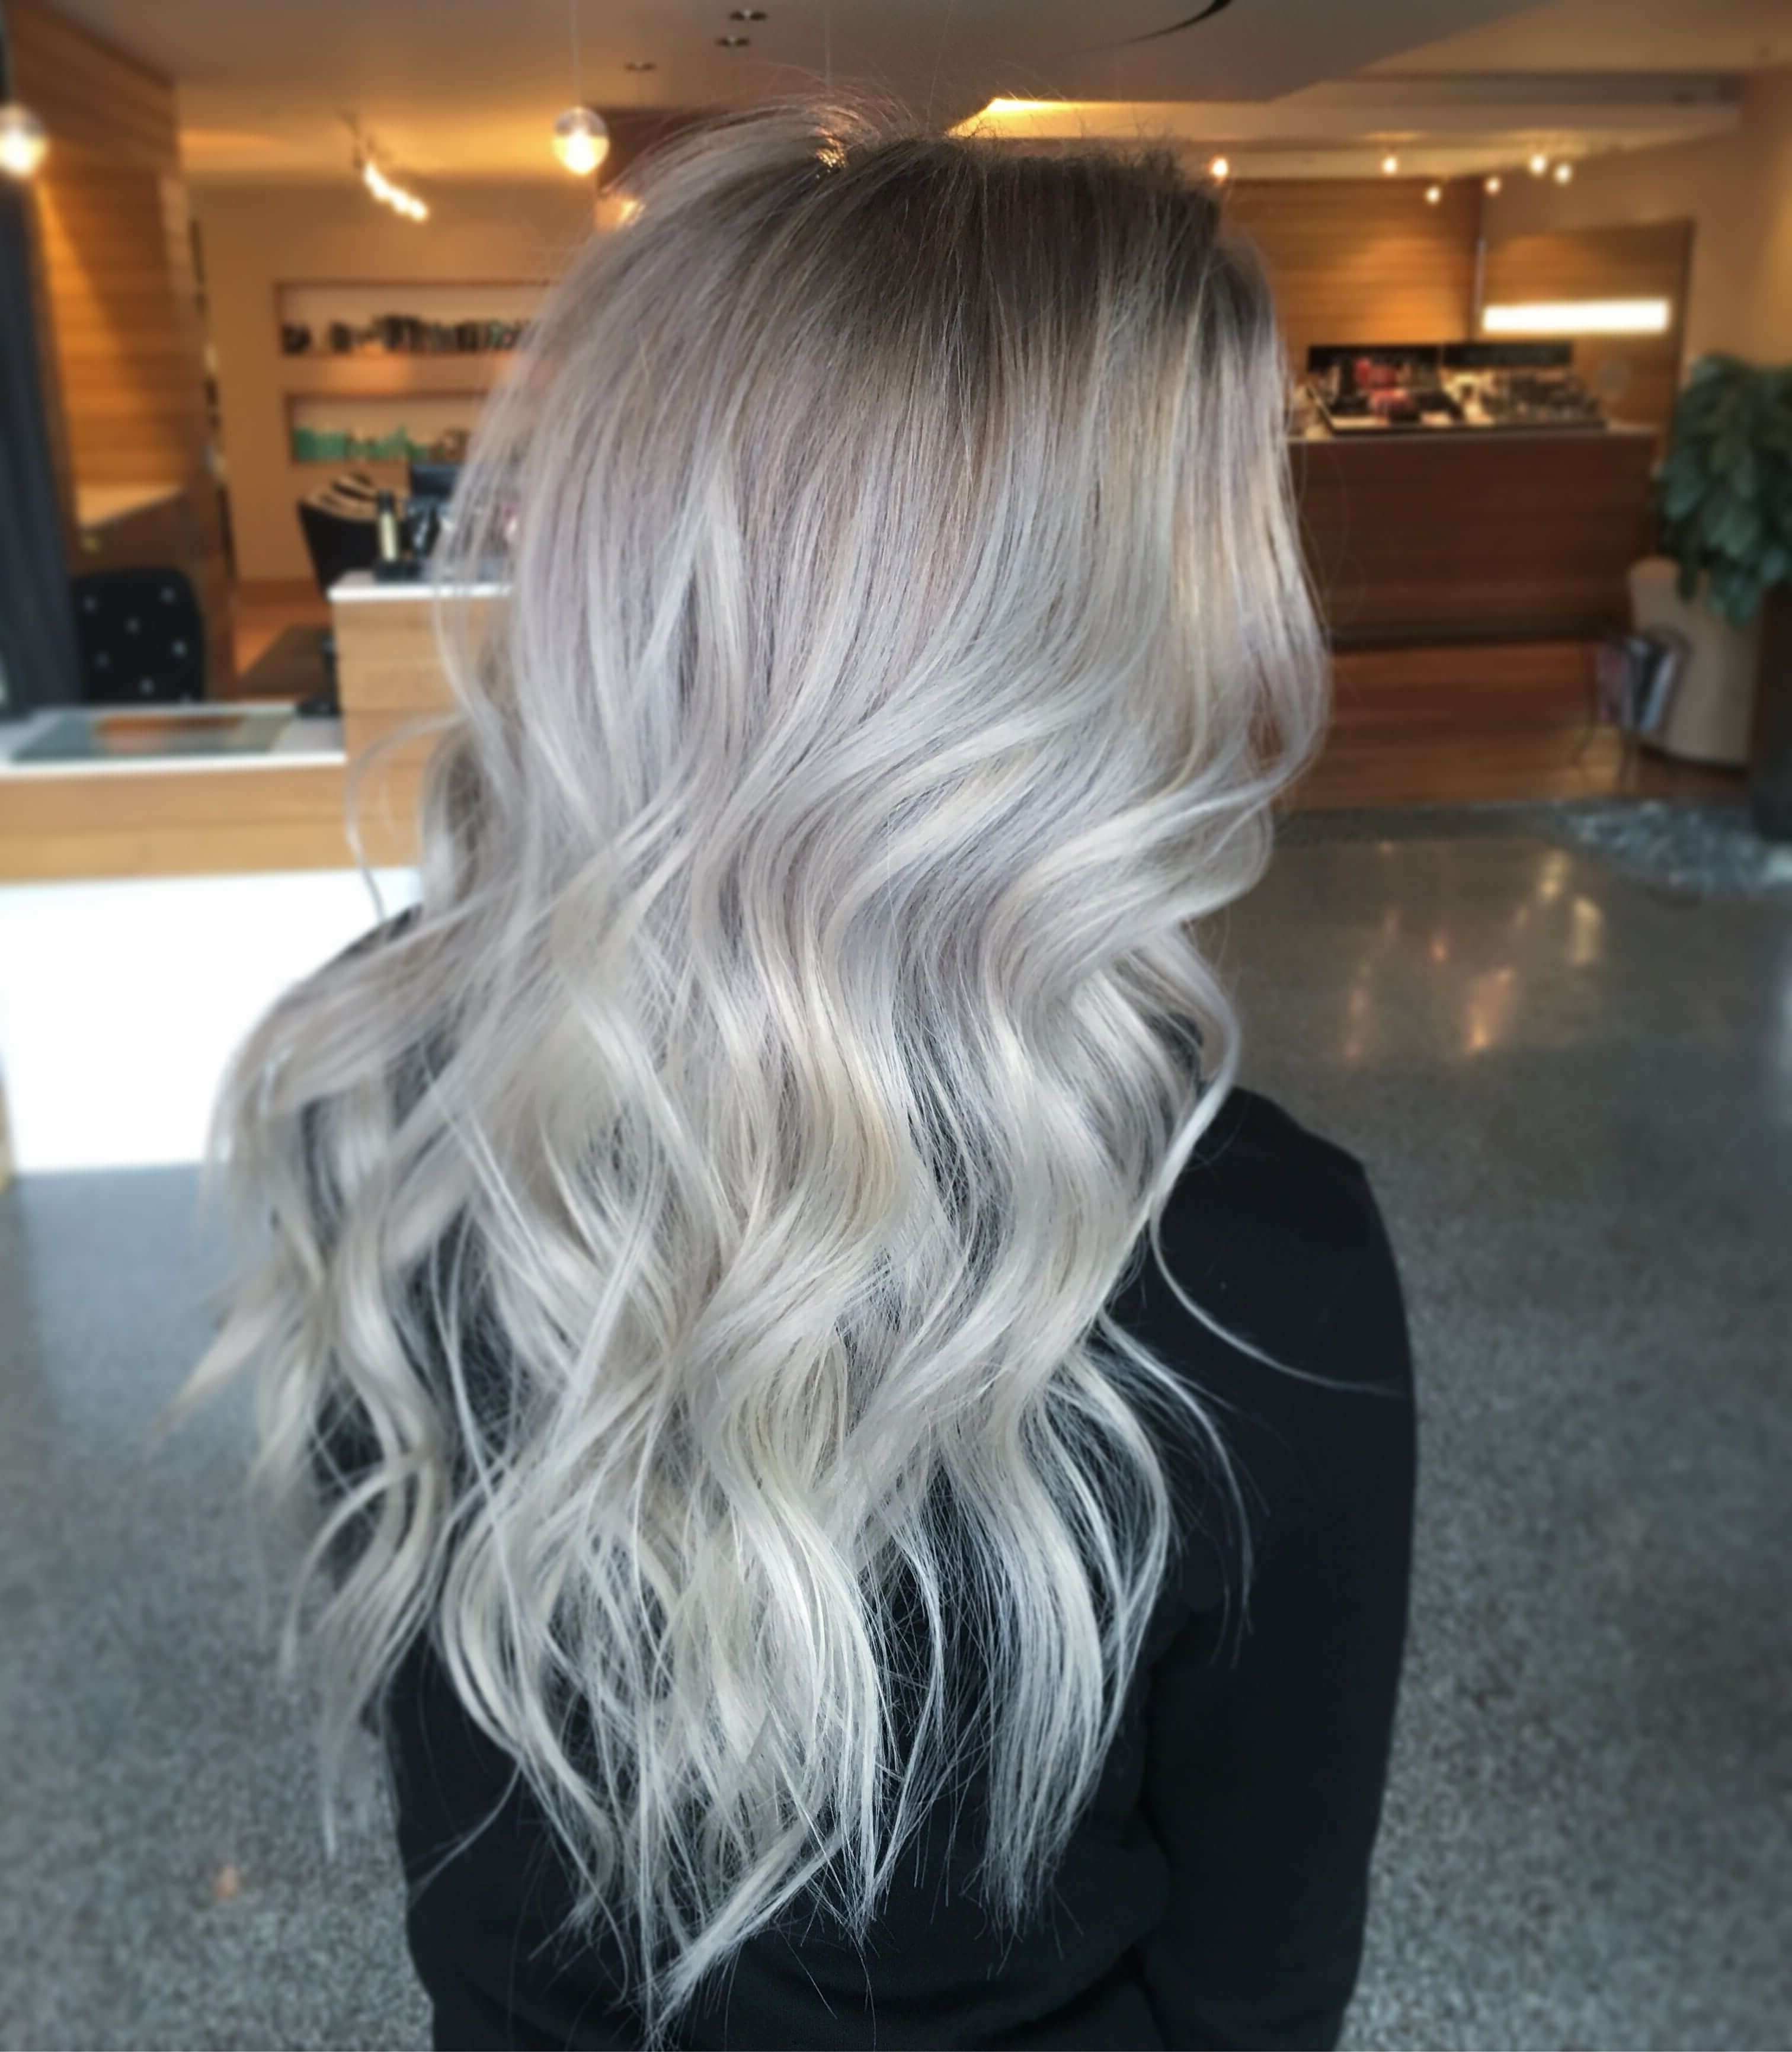 30 Blonde Medium Hairstyles Ideas For Women For Widely Used Glamorous Silver Blonde Waves Hairstyles (View 15 of 20)